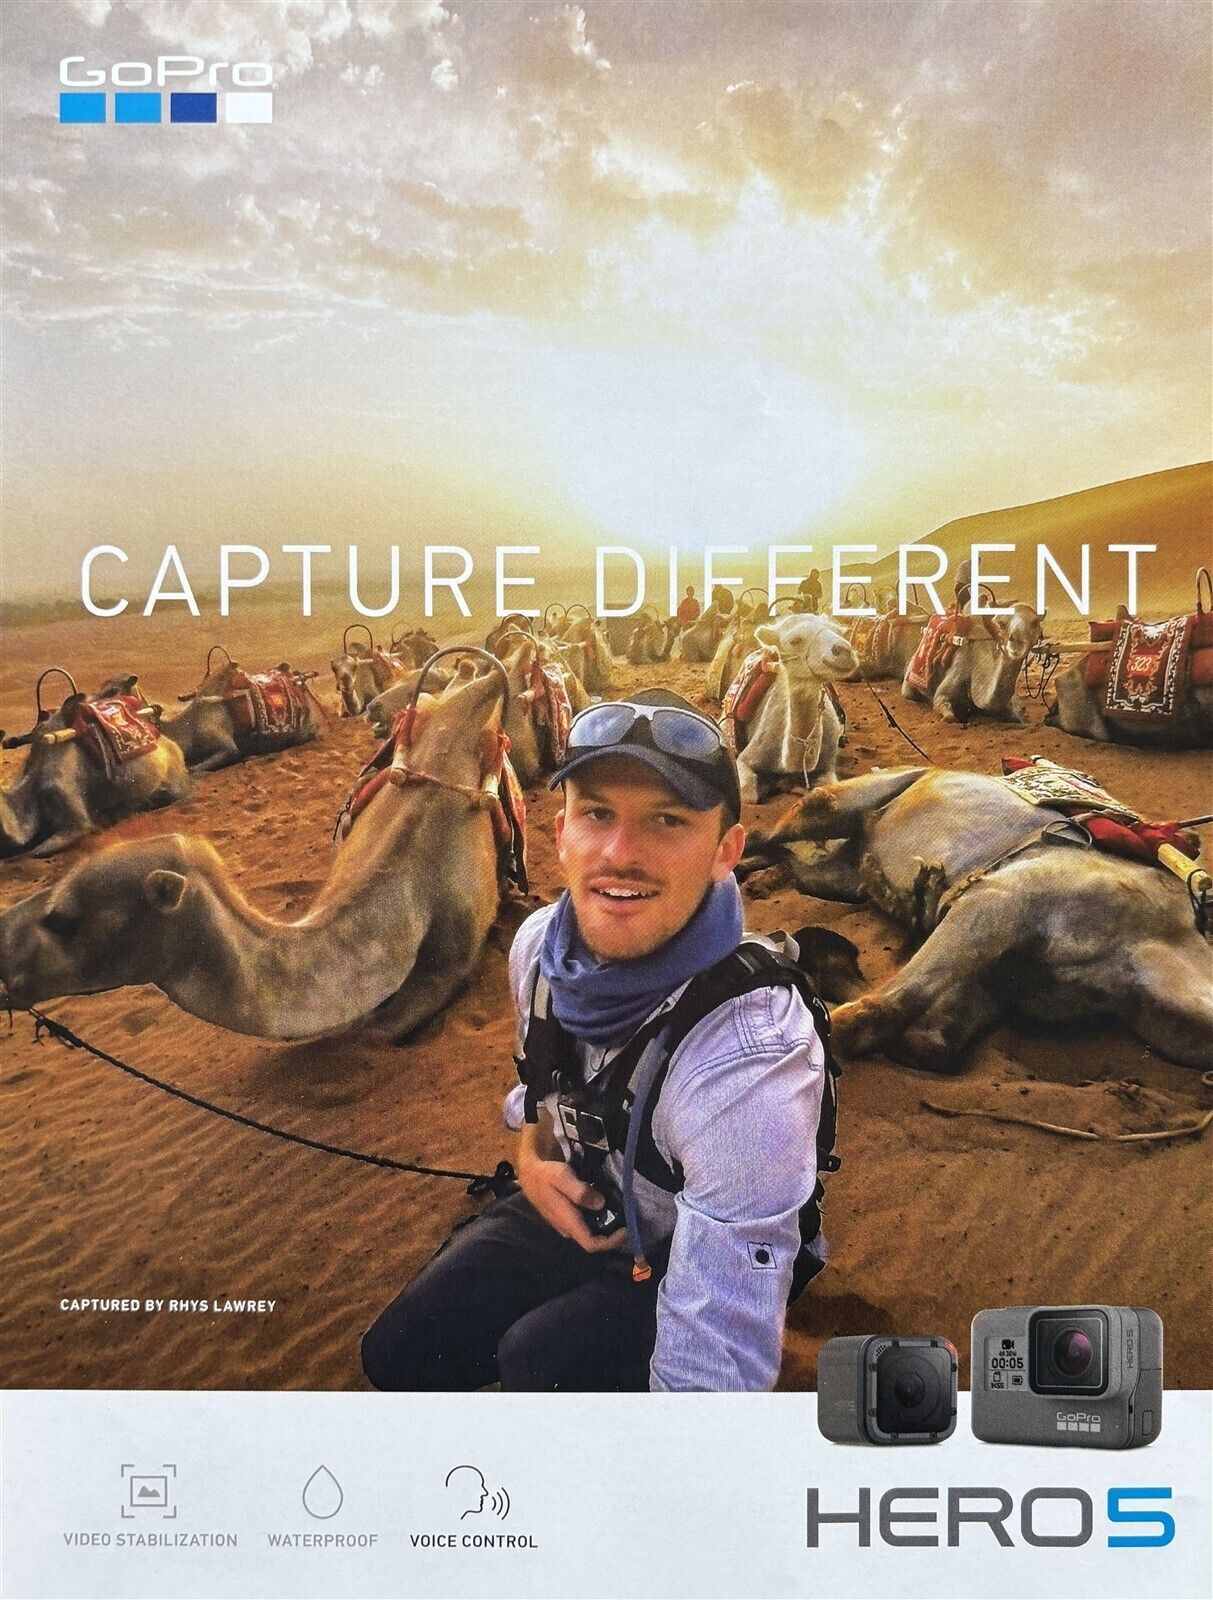 2015 GoPro Hero5 Capture Different by Rhys Lawrey Sunset With Camels PRINT AD